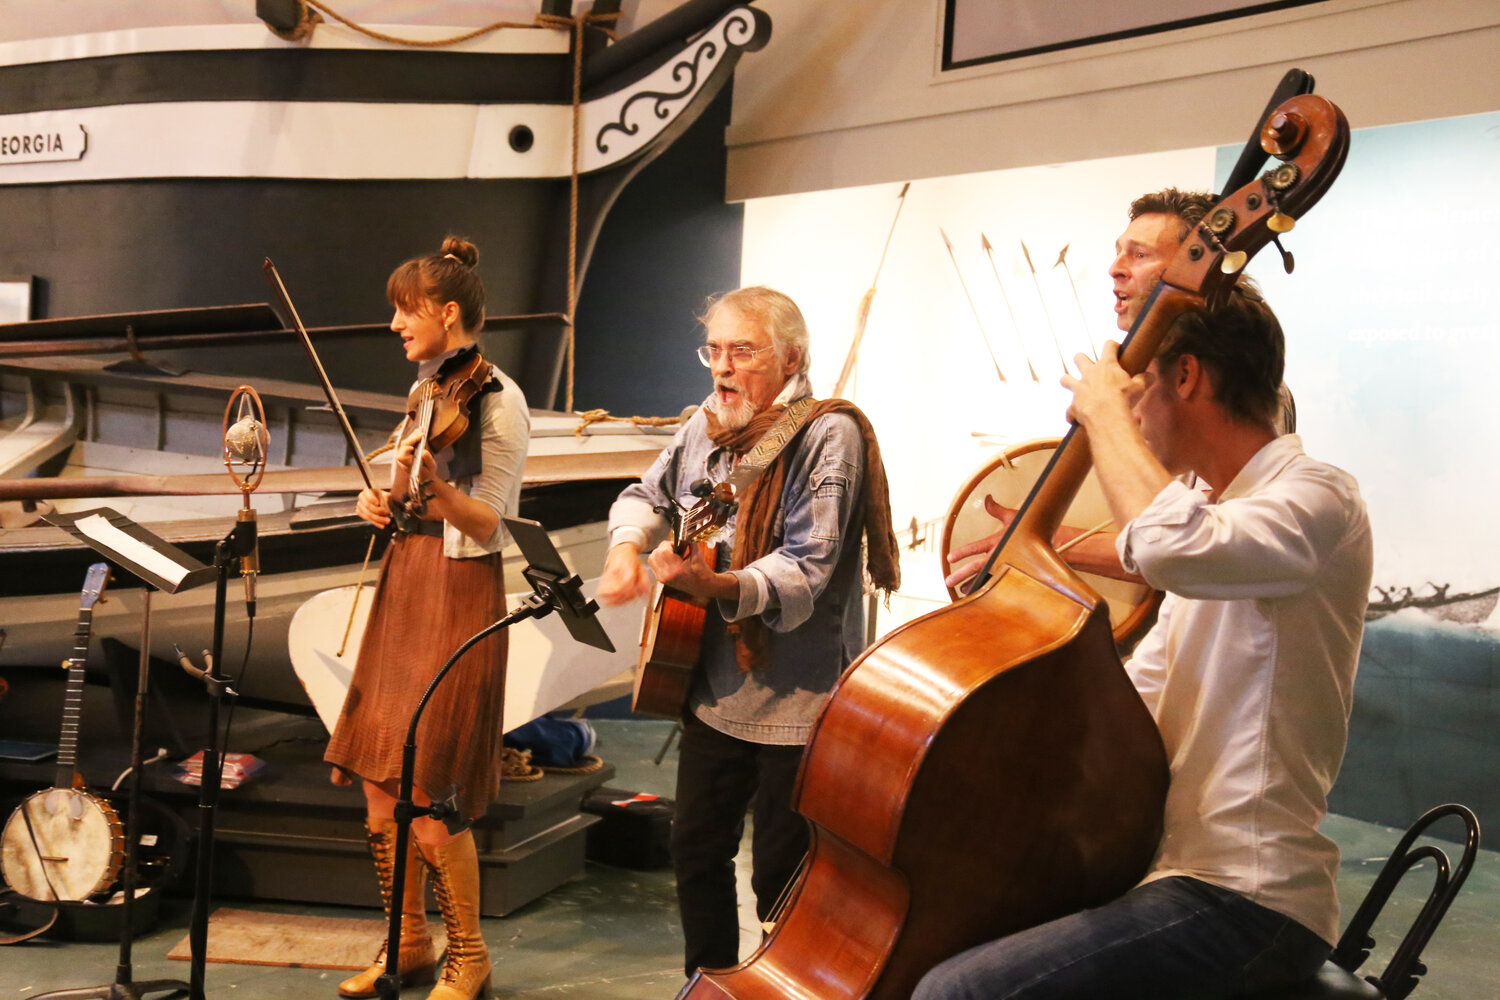 From left, Graeme Durovich, Bill Schustik, Pete Arsenault and Nigel Goss perform a sea shanty at the Nantucket Whaling Museum last week.